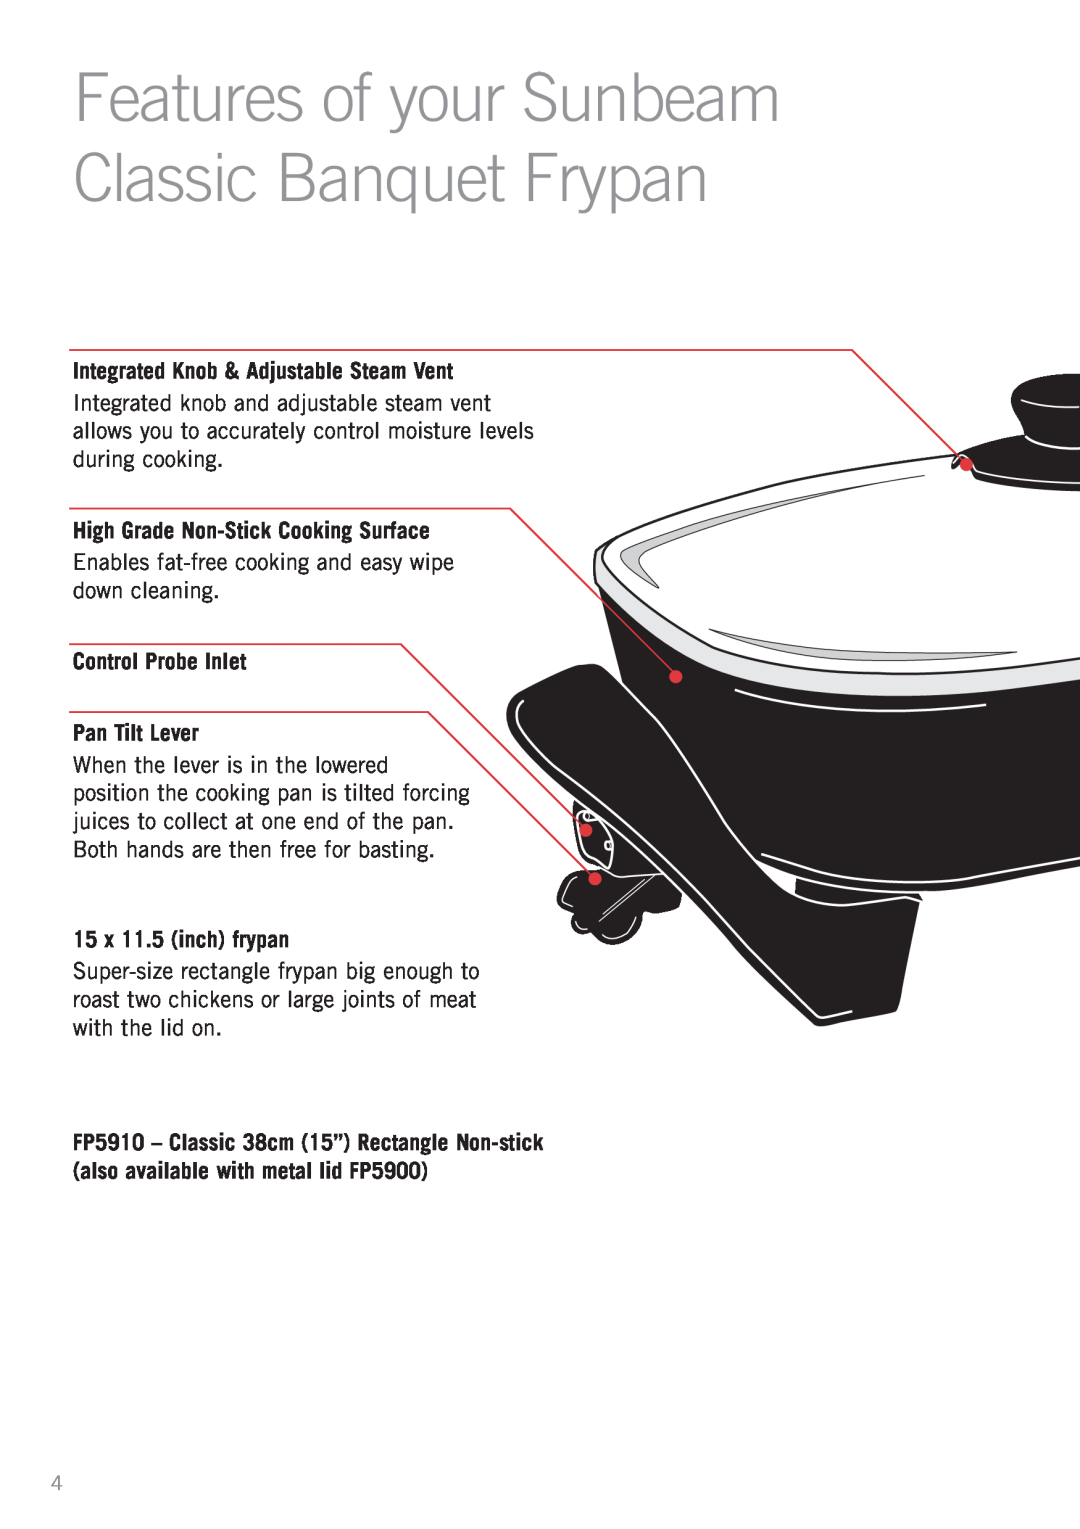 Sunbeam FP5500, FP5900, SK4200 Features of your Sunbeam Classic Banquet Frypan, Integrated Knob & Adjustable Steam Vent 